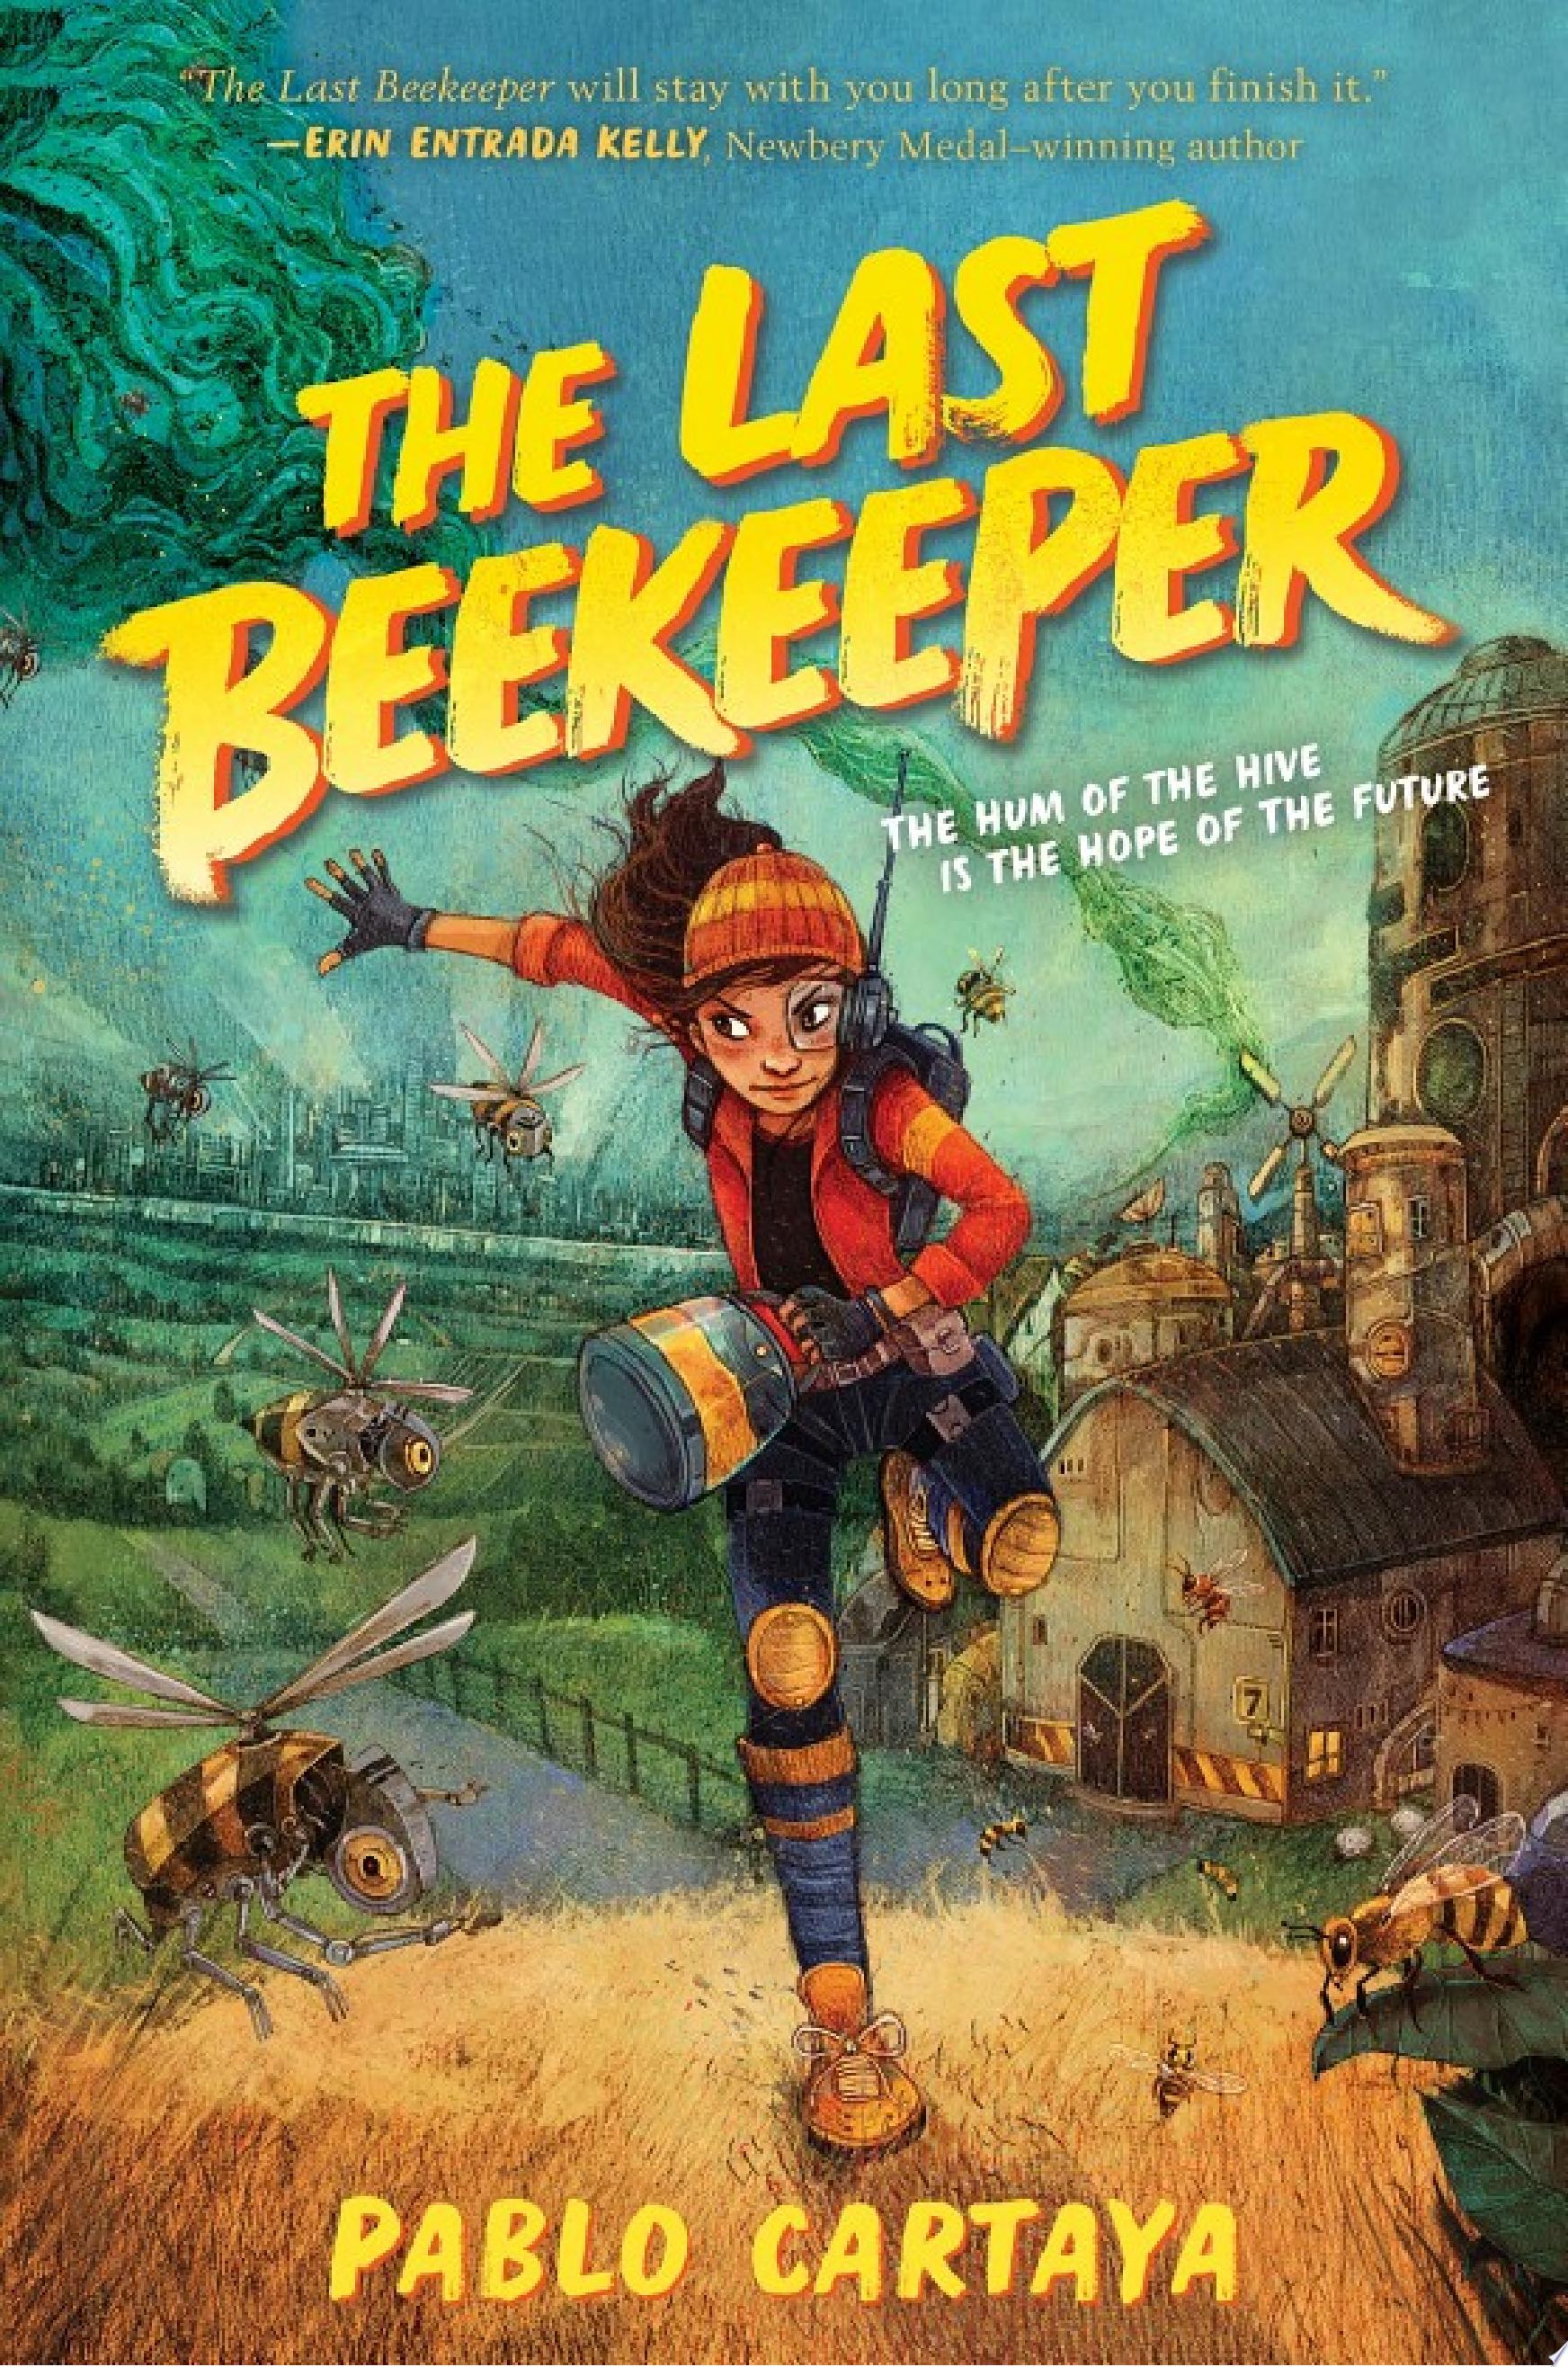 Image for "The Last Beekeeper"